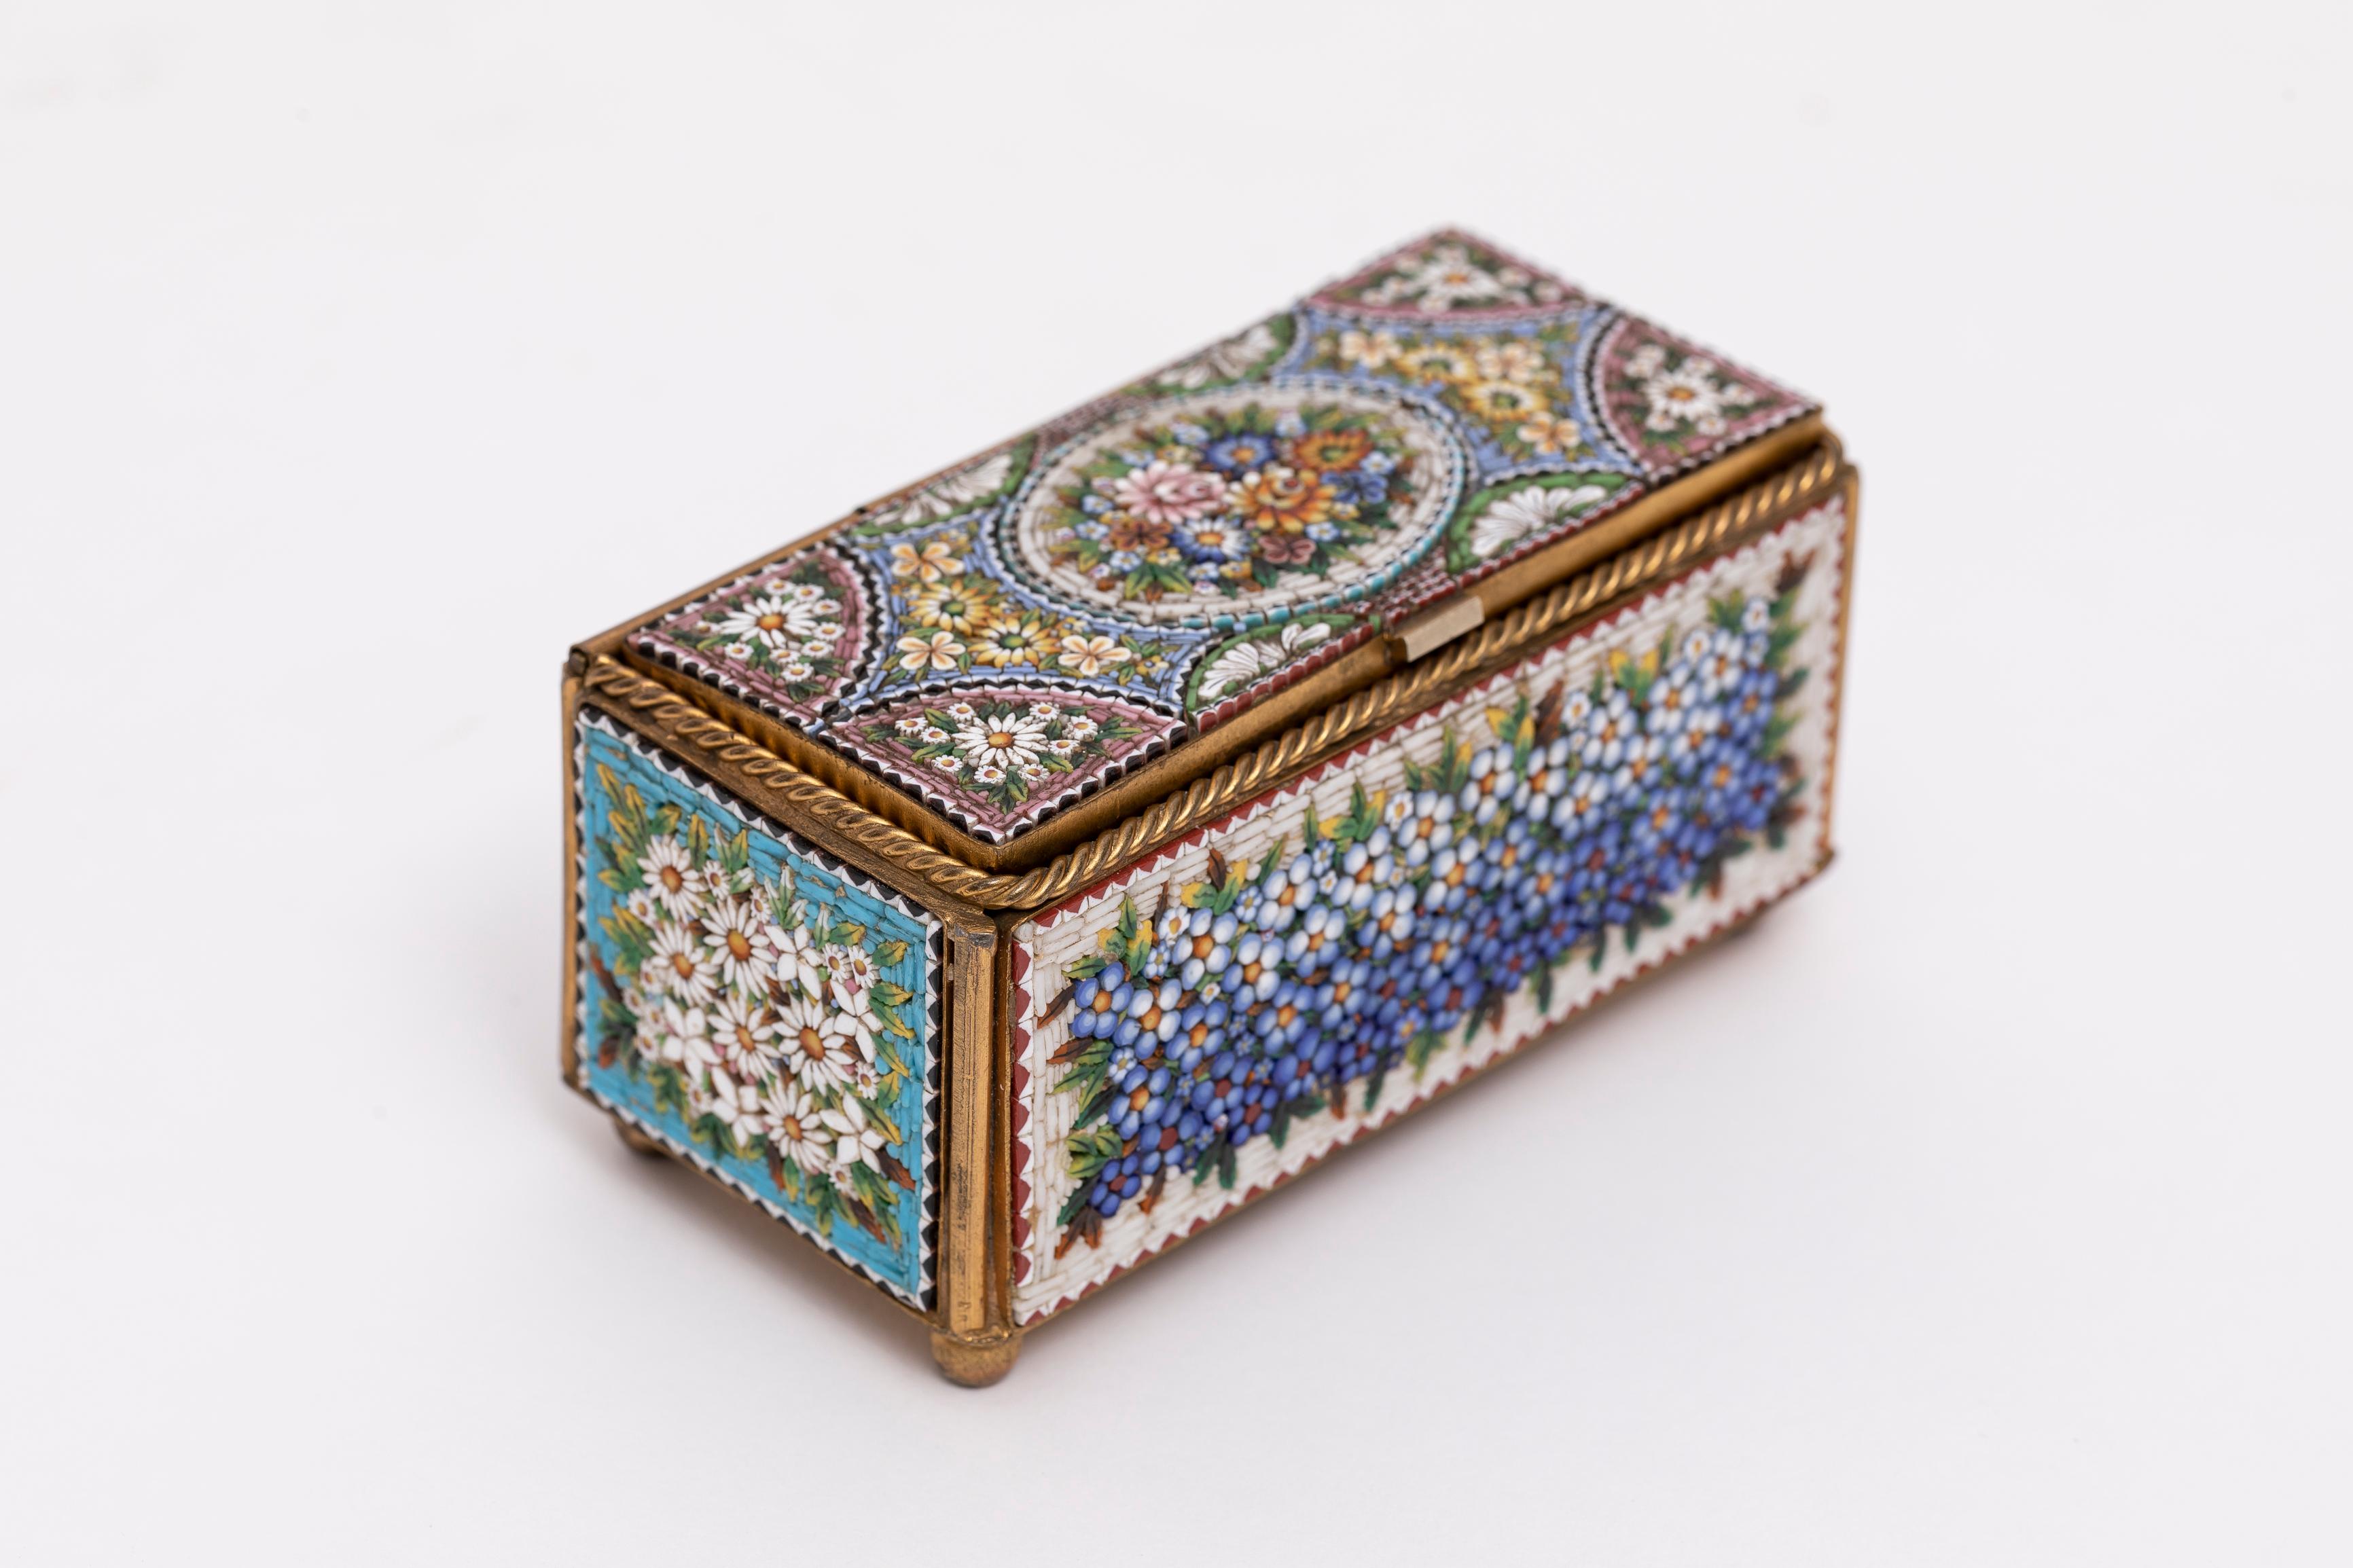 A Marvelous Antique 19th Century Italian Micro Mosaic Floral Motif Jewelry Box.  Step back in time with this exquisite Italian micro mosaic jewelry box dating back to 1880. Crafted with meticulous attention to detail, this gorgeous dore bronze